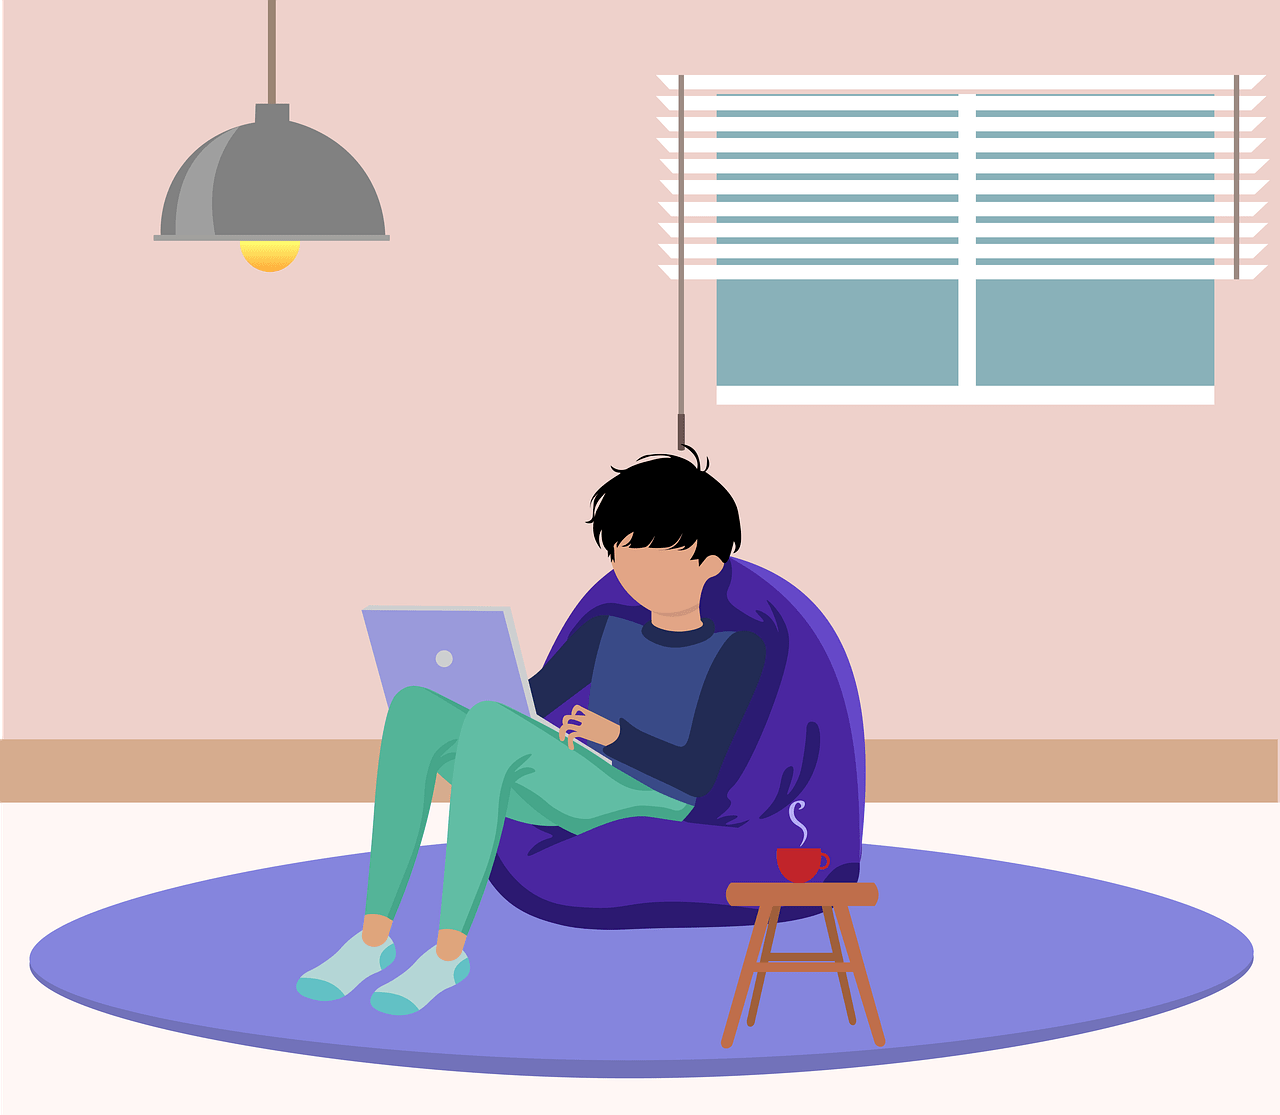 Illustration of a student sitting in a living room on a bean bag chair with a laptop computer on their lap